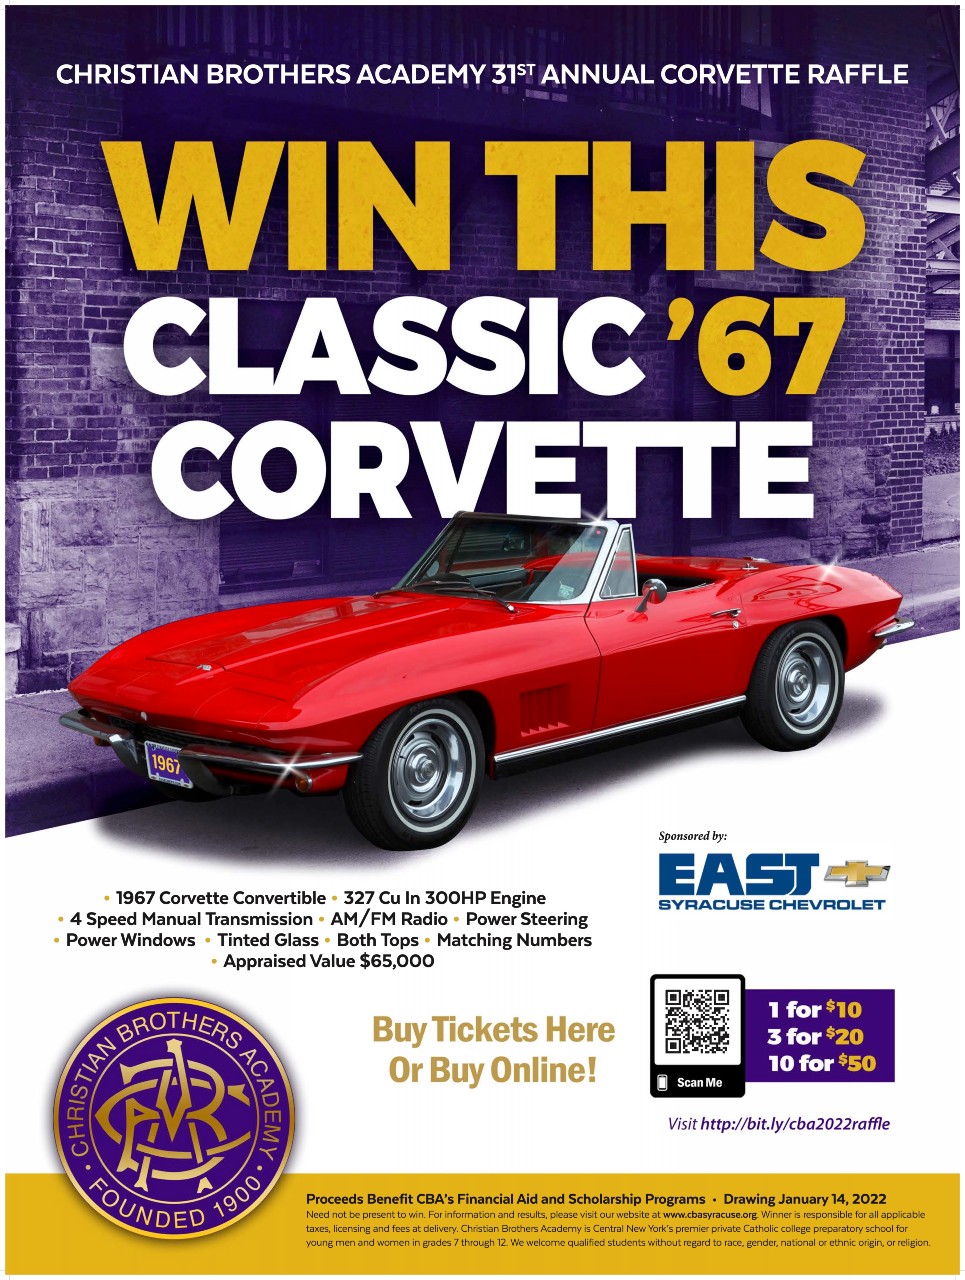 Tickets are now on sale for the 2021 Corvette Raffle. 